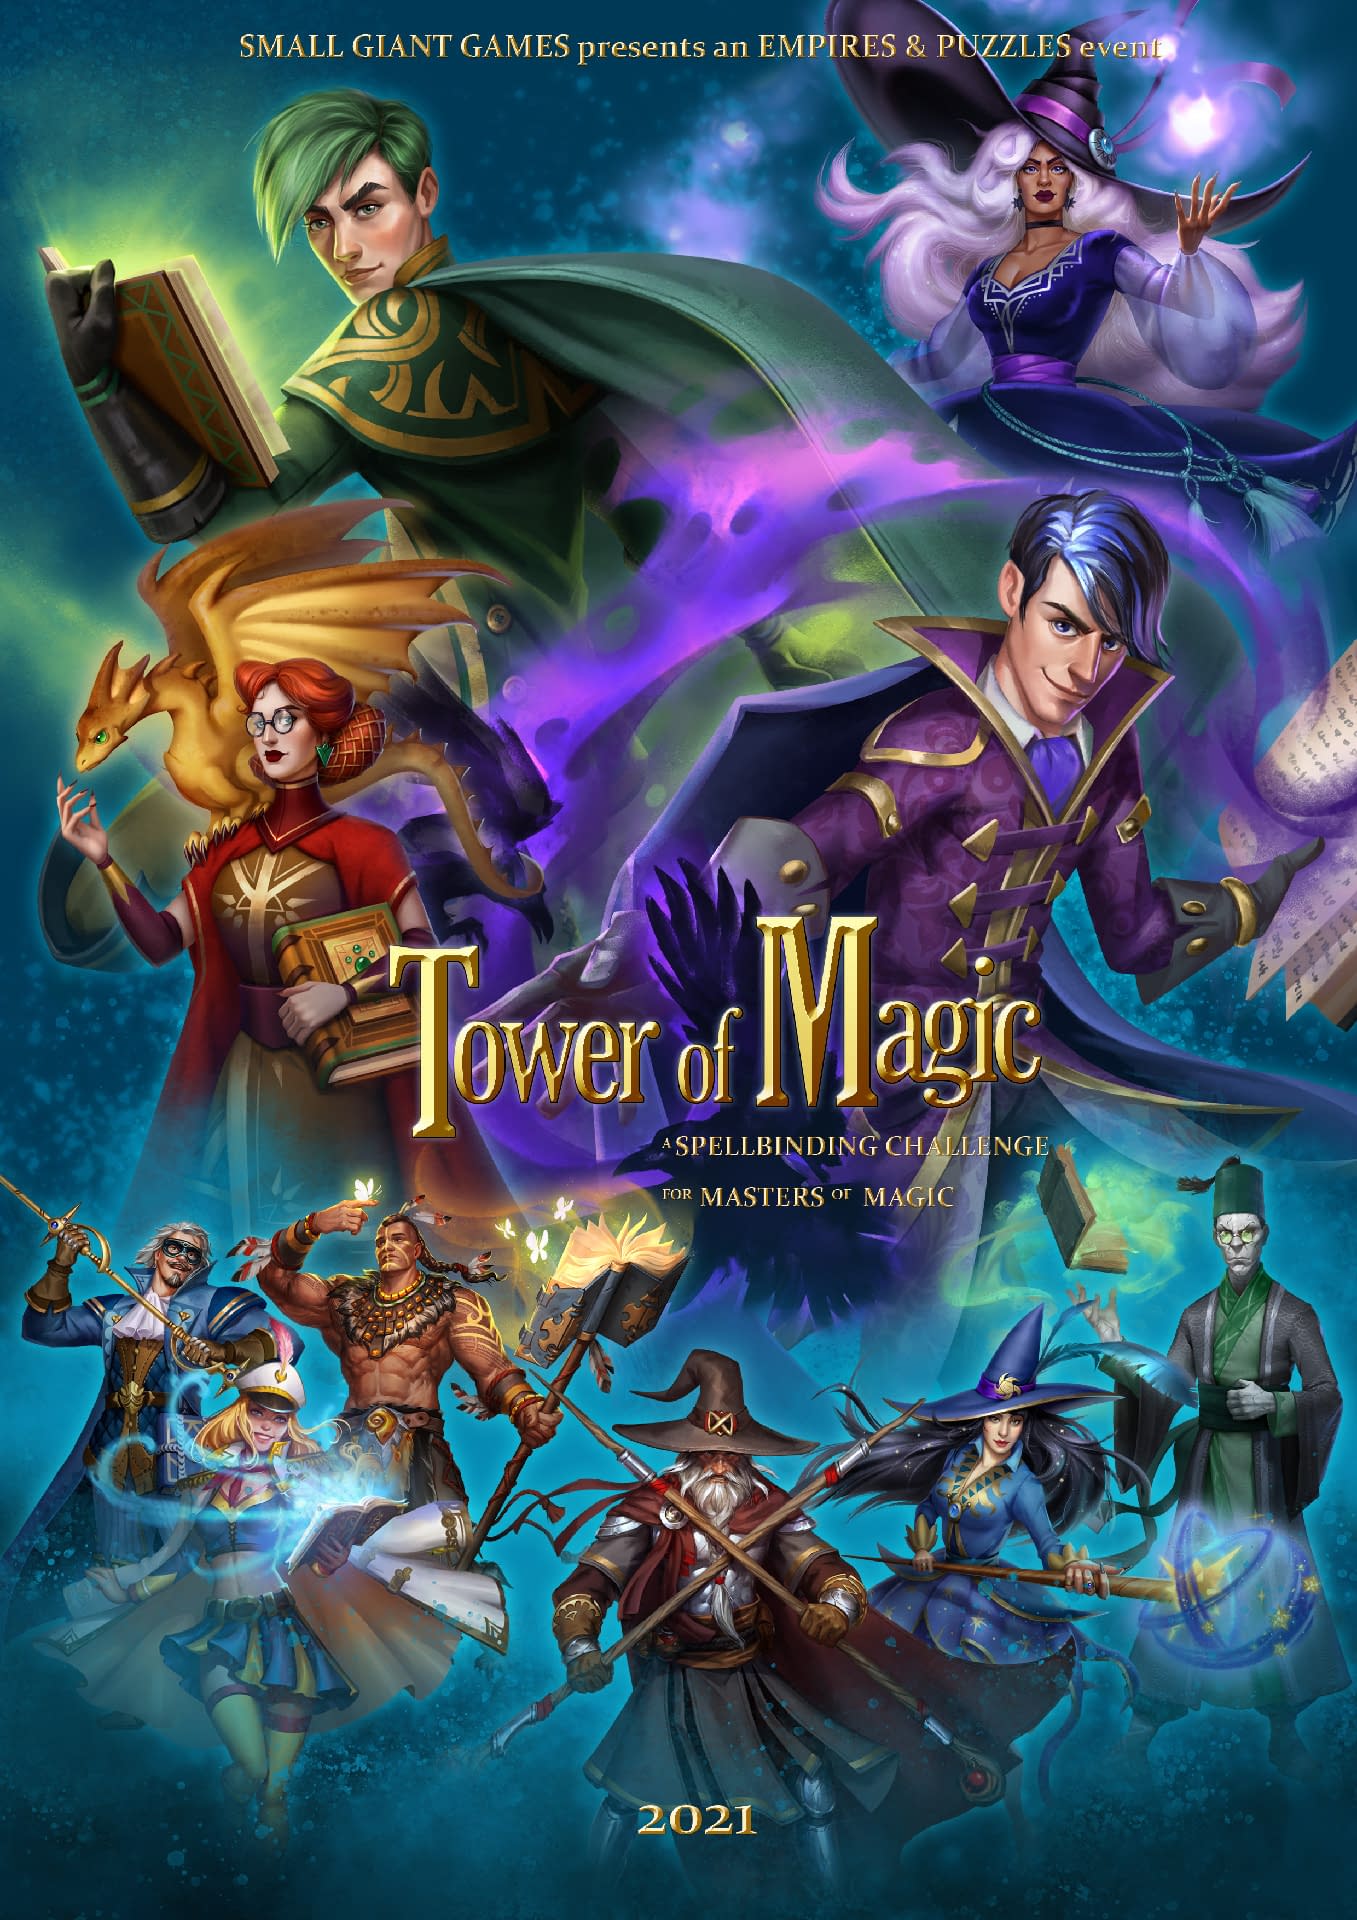 Memory paper pupil Empires & Puzzles Launches New Tower Of Magic Event